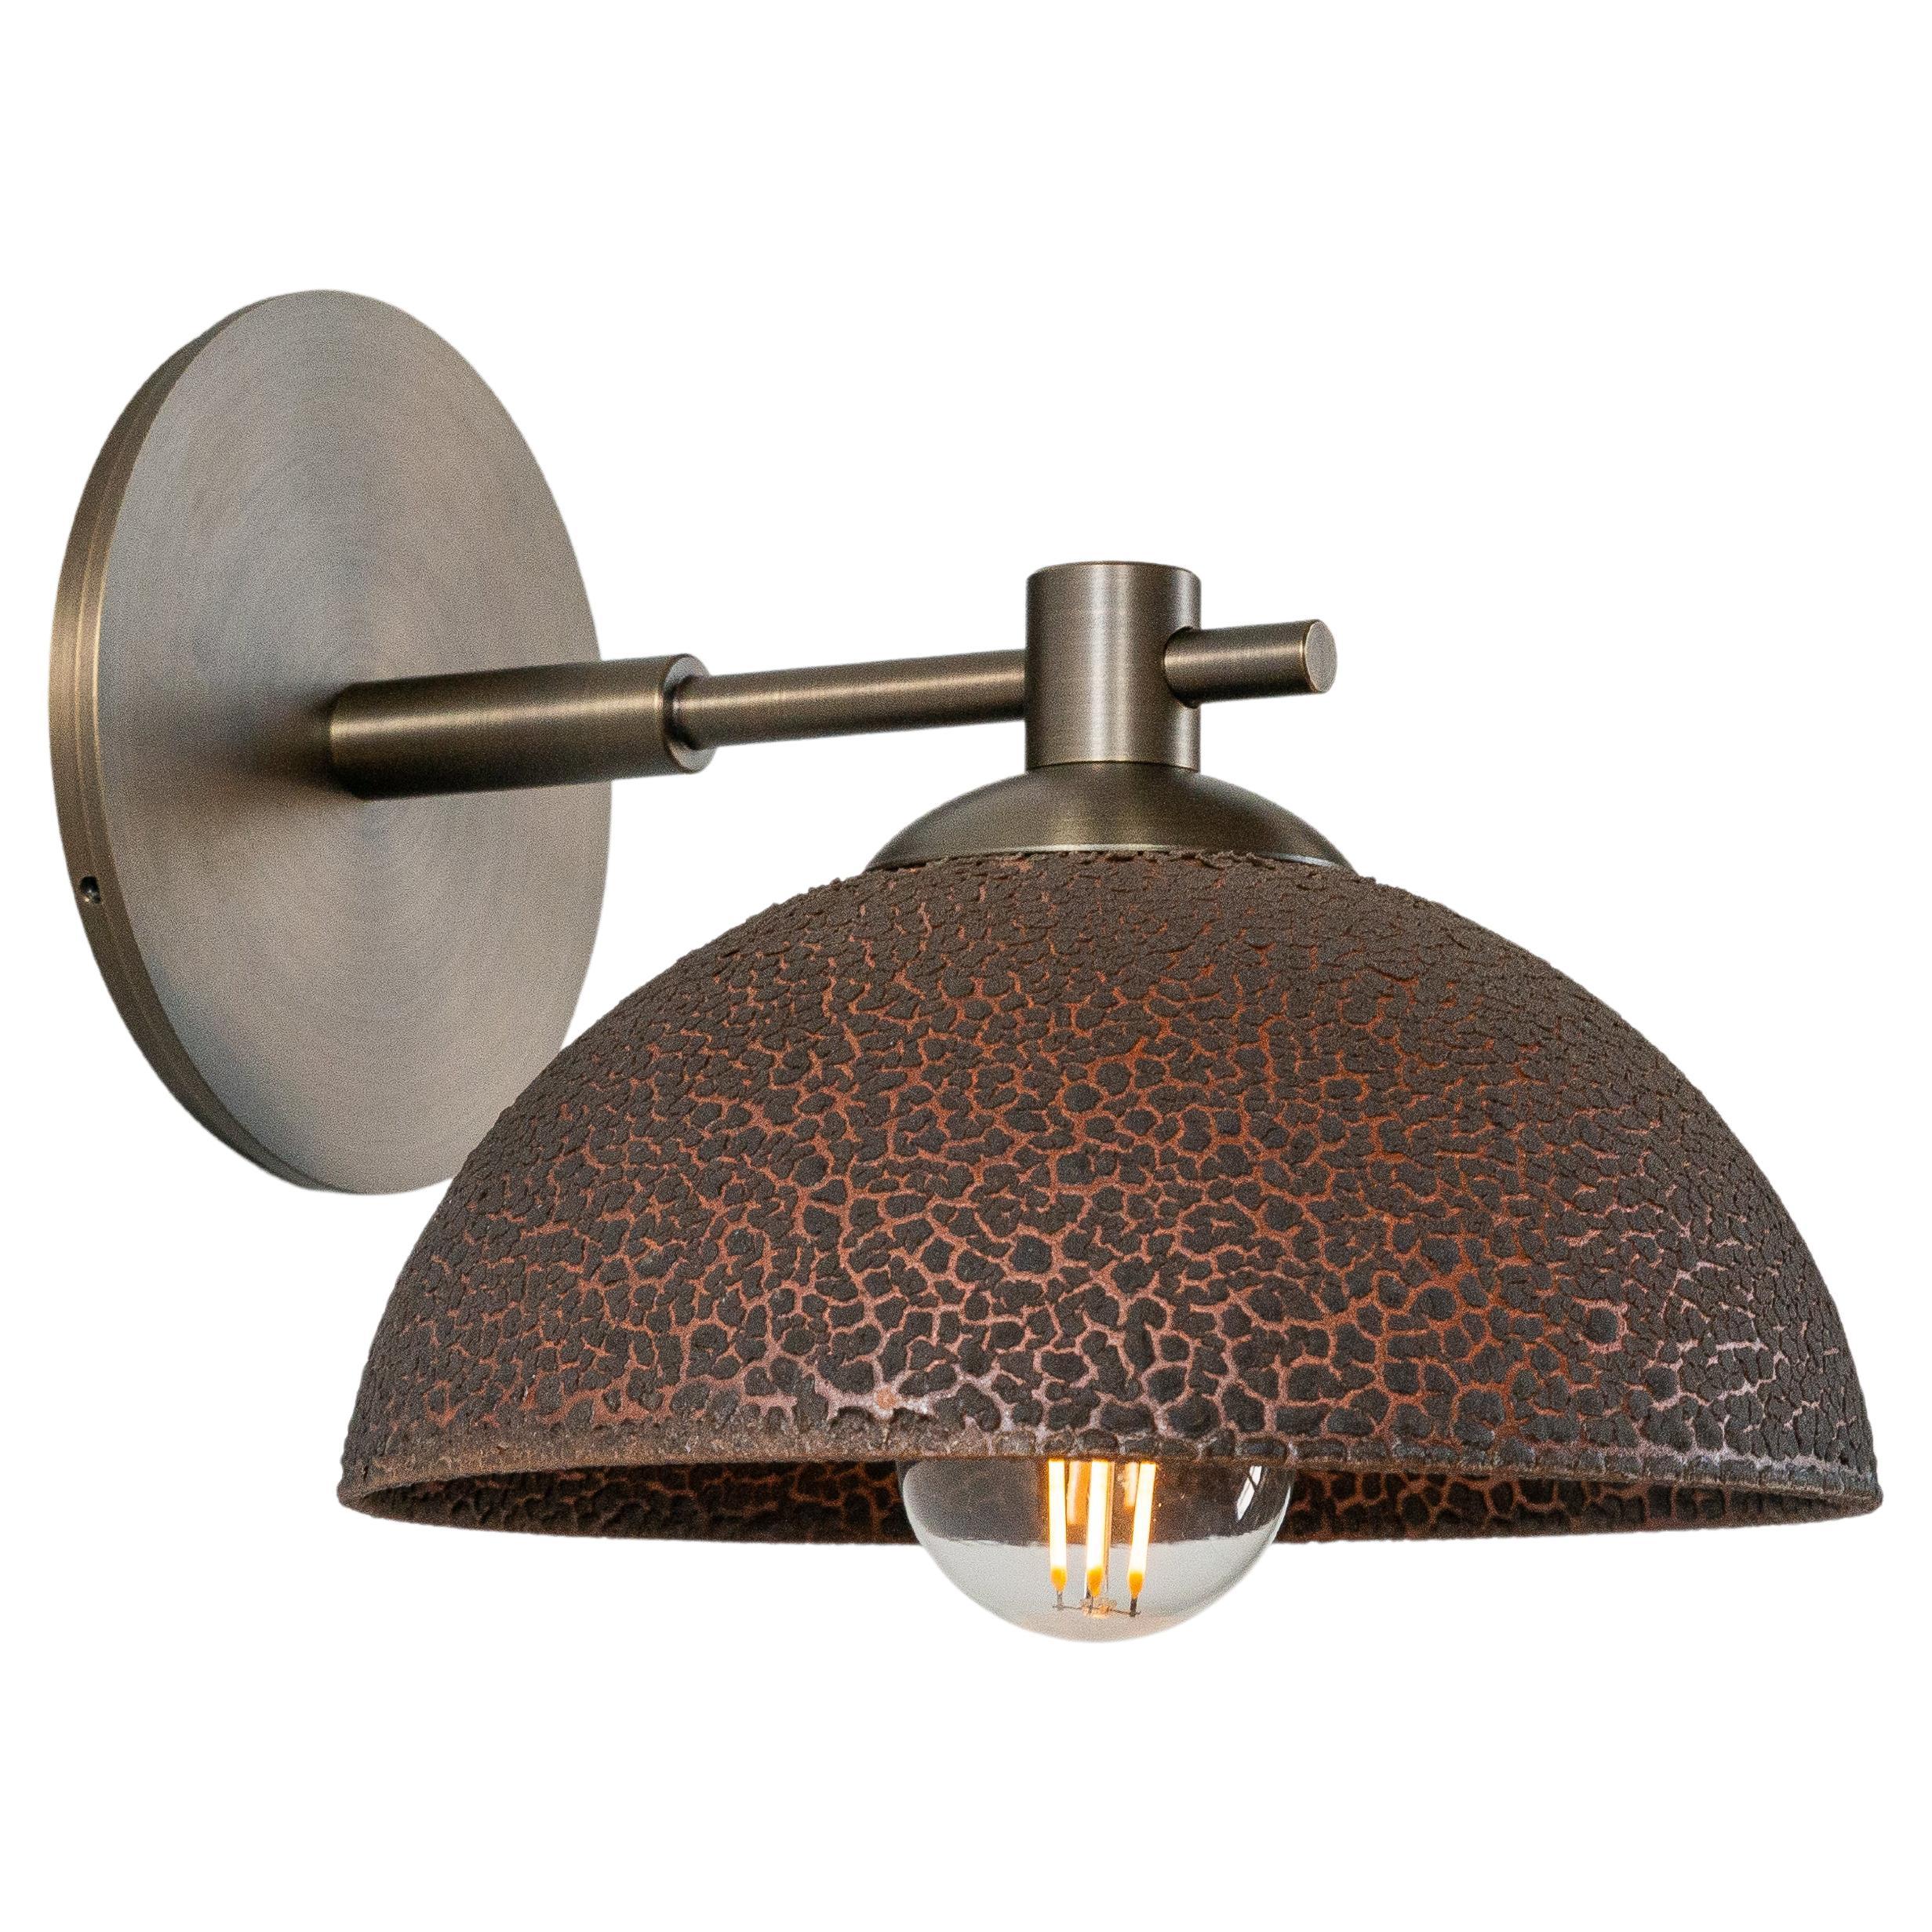 Dixon Sconce Handcrafted in Terracotta and Brass by Pax Lighting For Sale